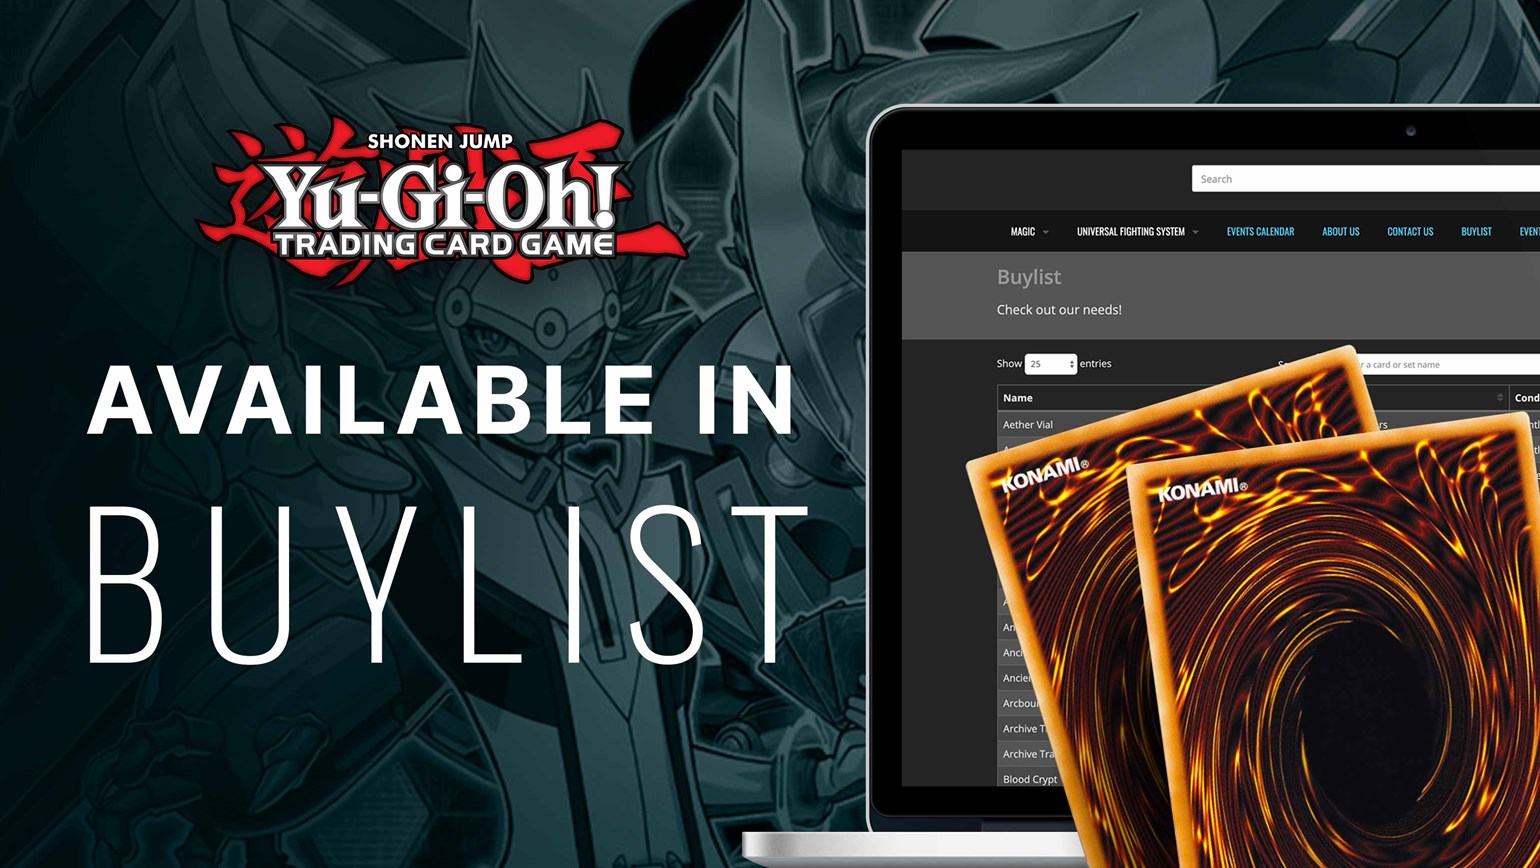 Yu-Gi-Oh! Now Live in Pro Buylist on Your Showcase and Website